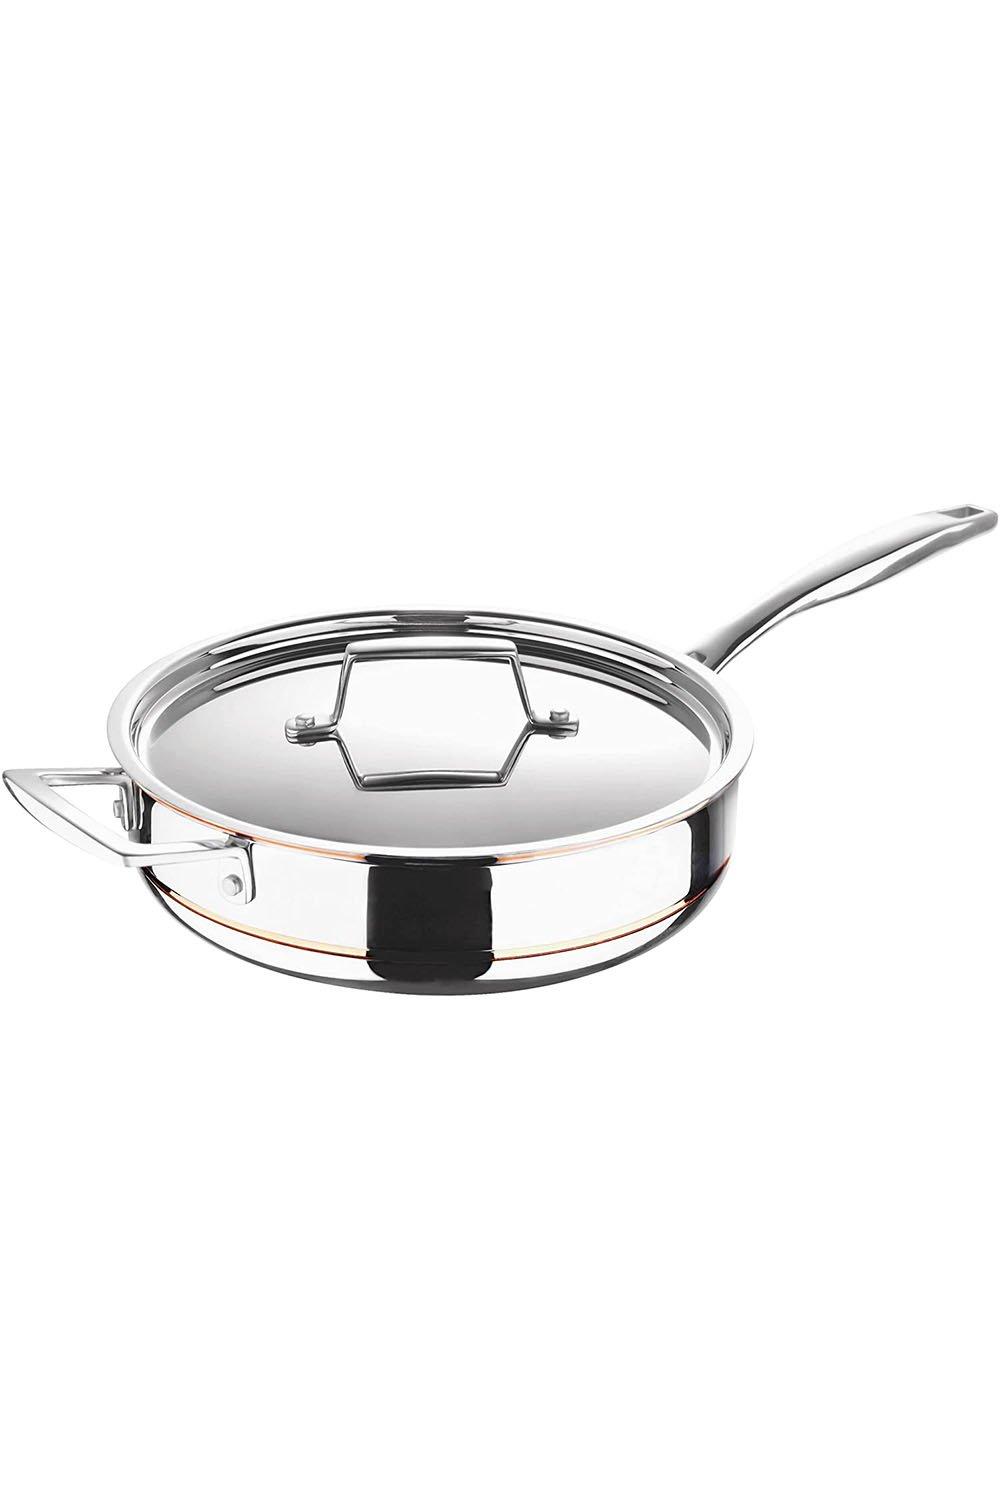 Argent 5CX Stainless Steel Saute Pan with Lid 2.8L Silver